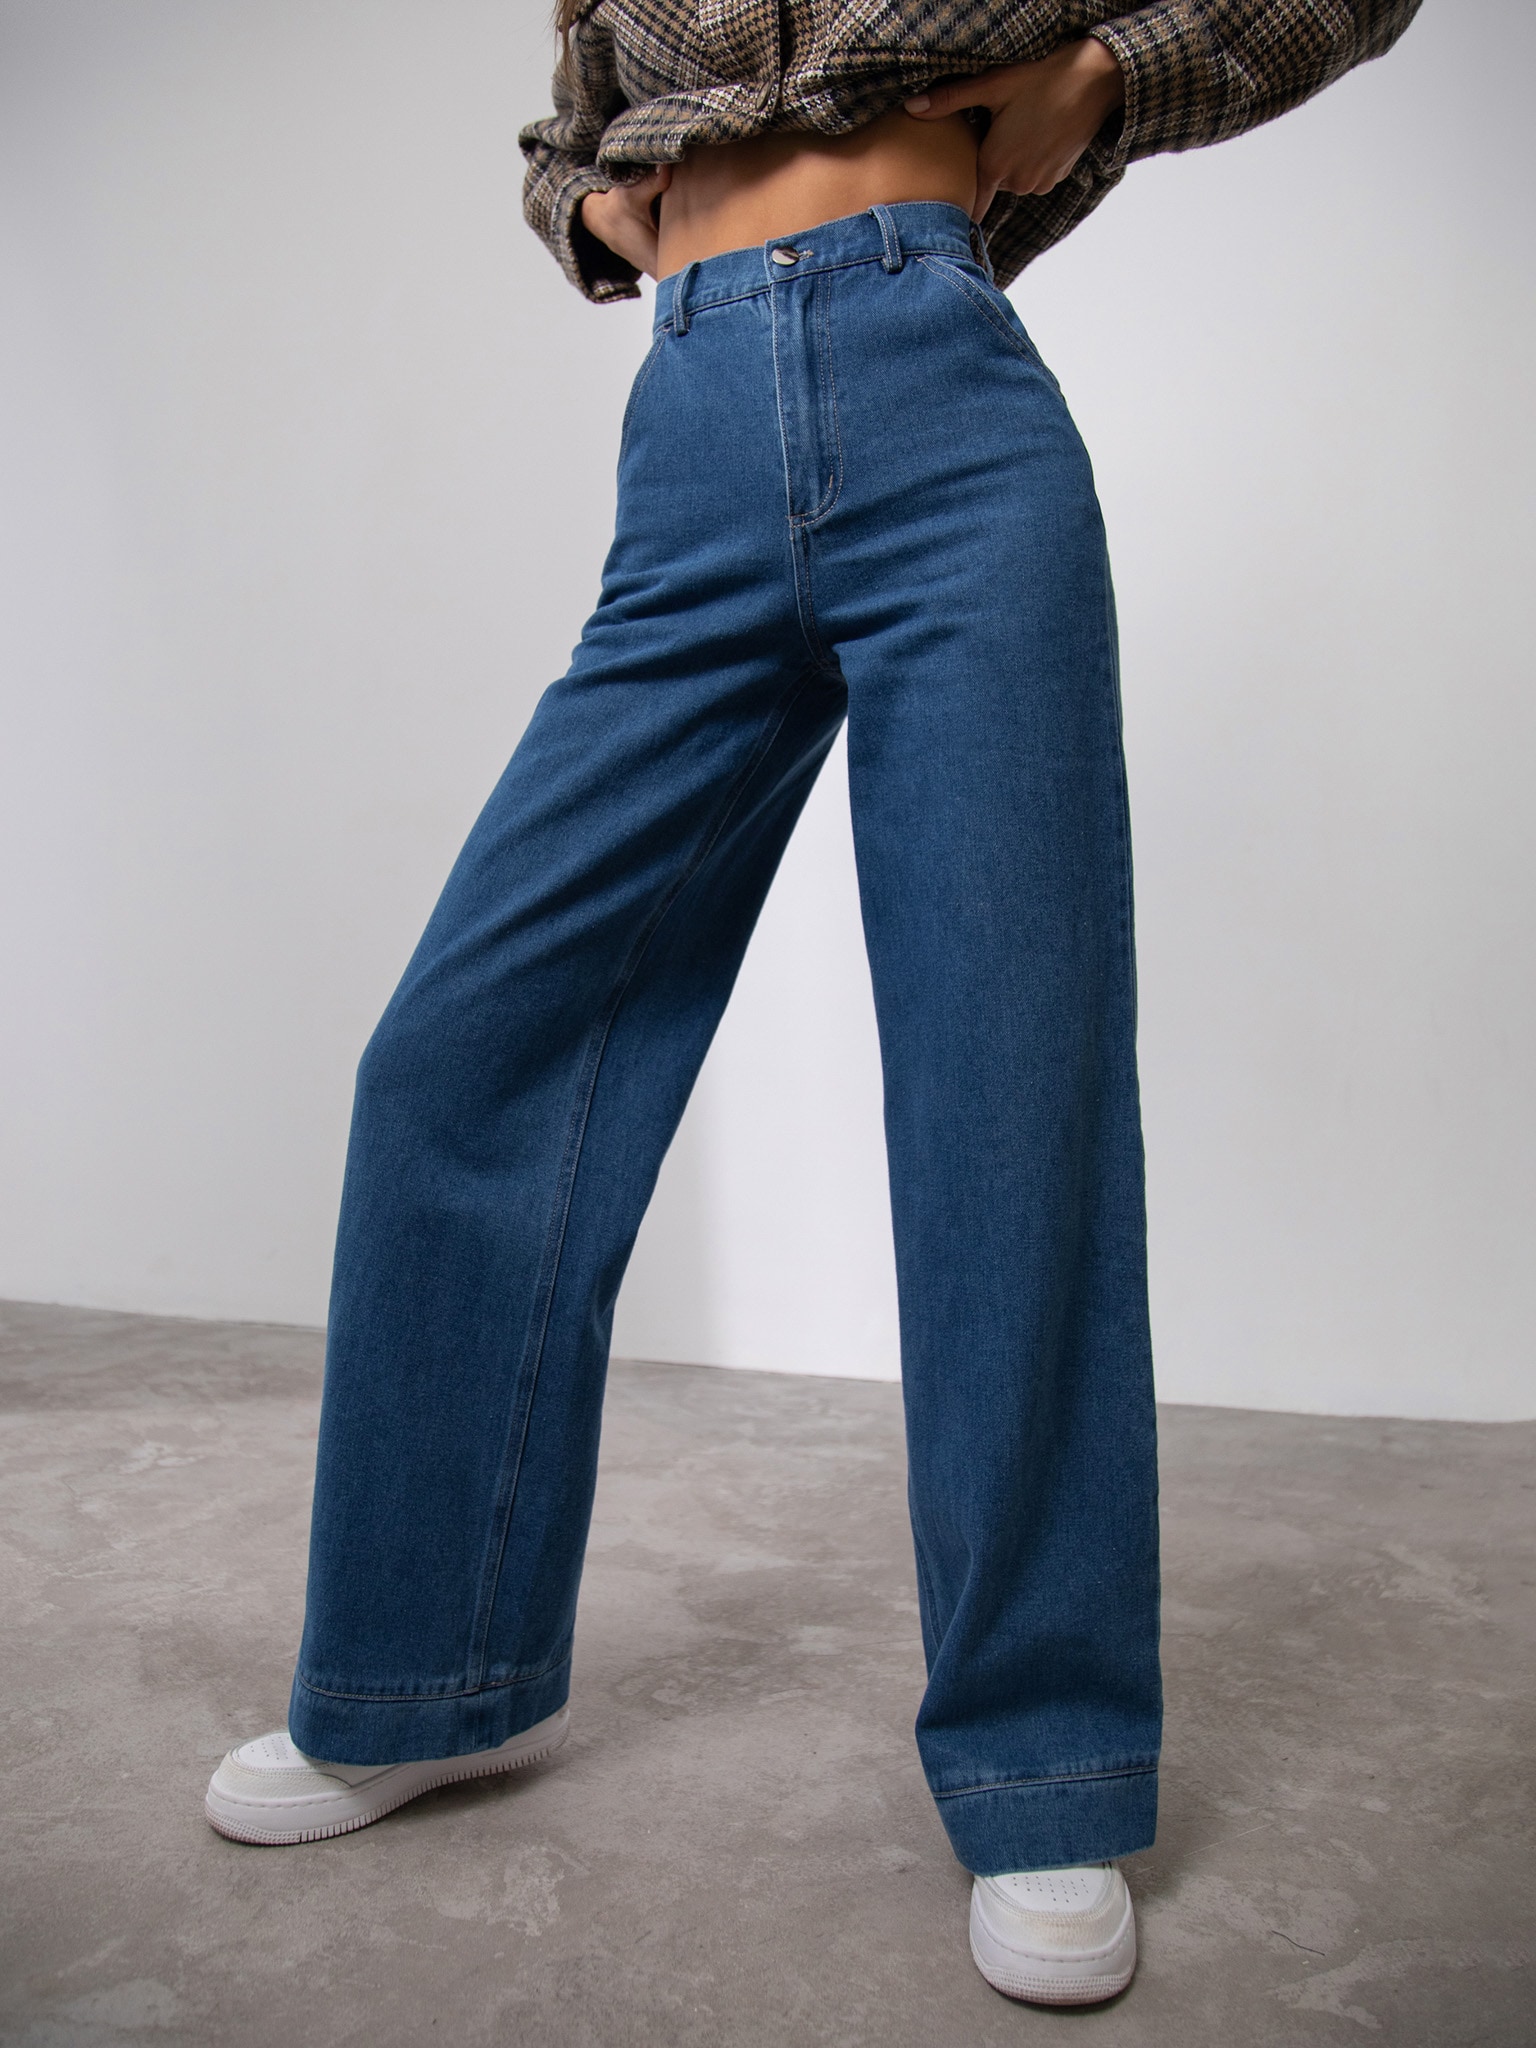 LICHI - Online fashion store :: High-rise flared jeans